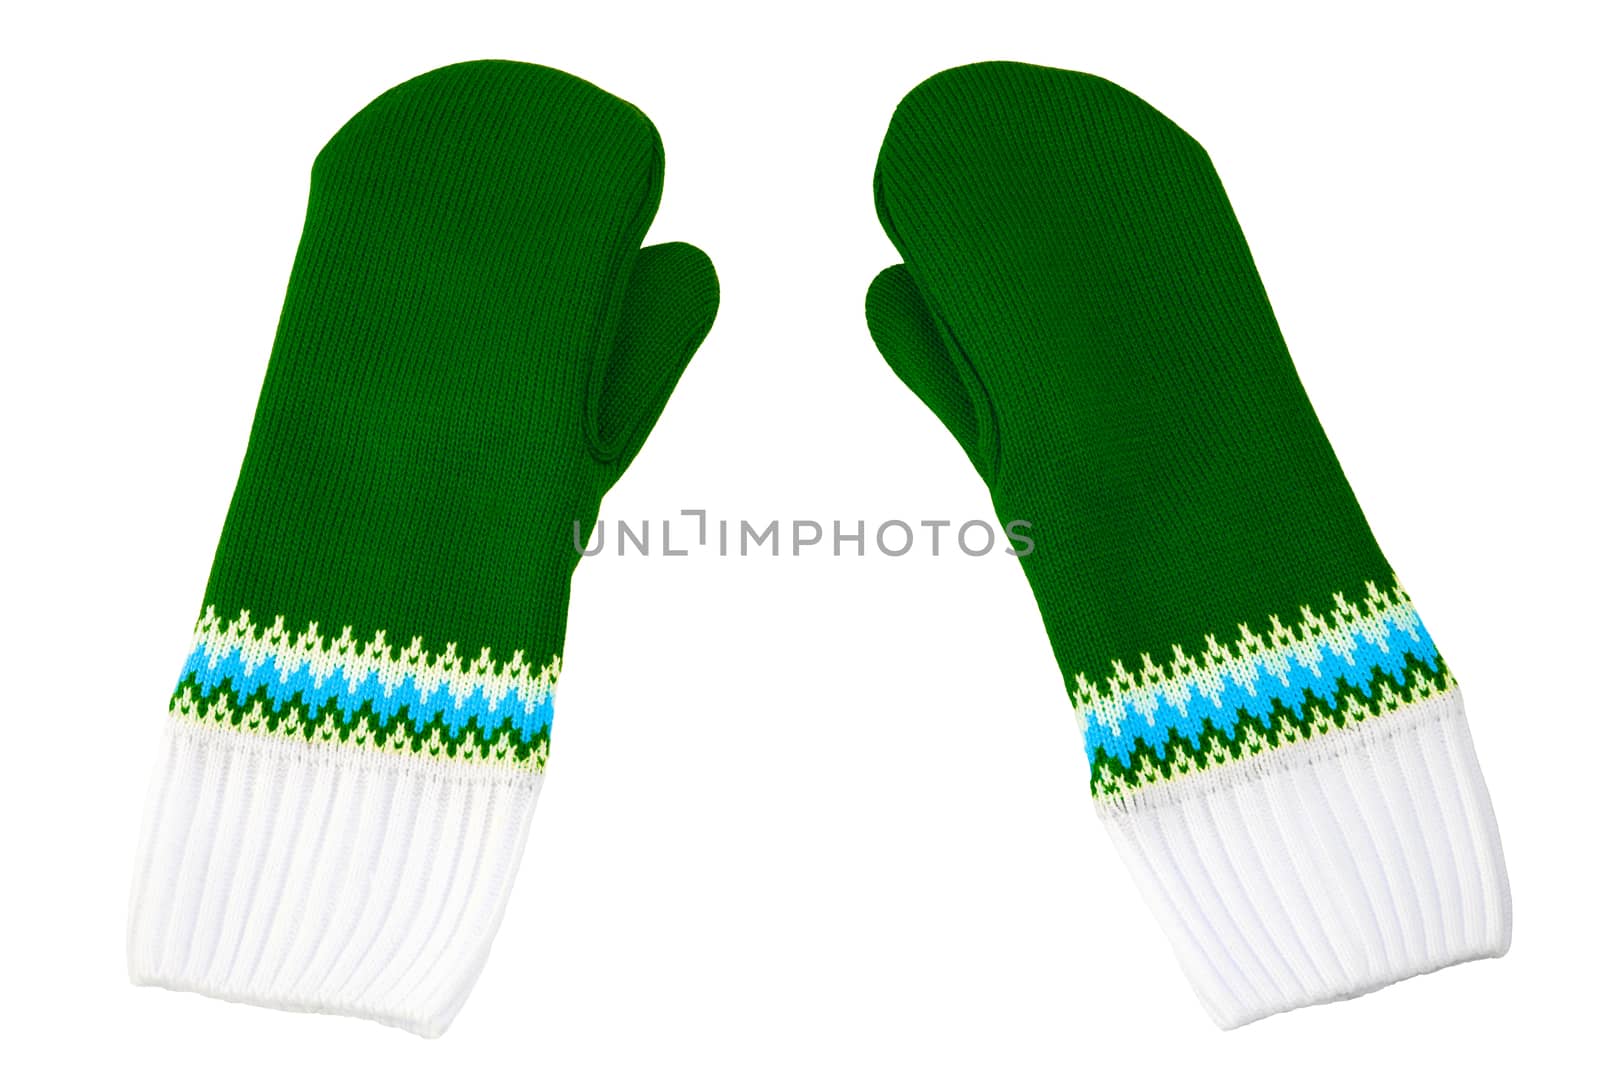 green and white knited mittens isolated on white background.